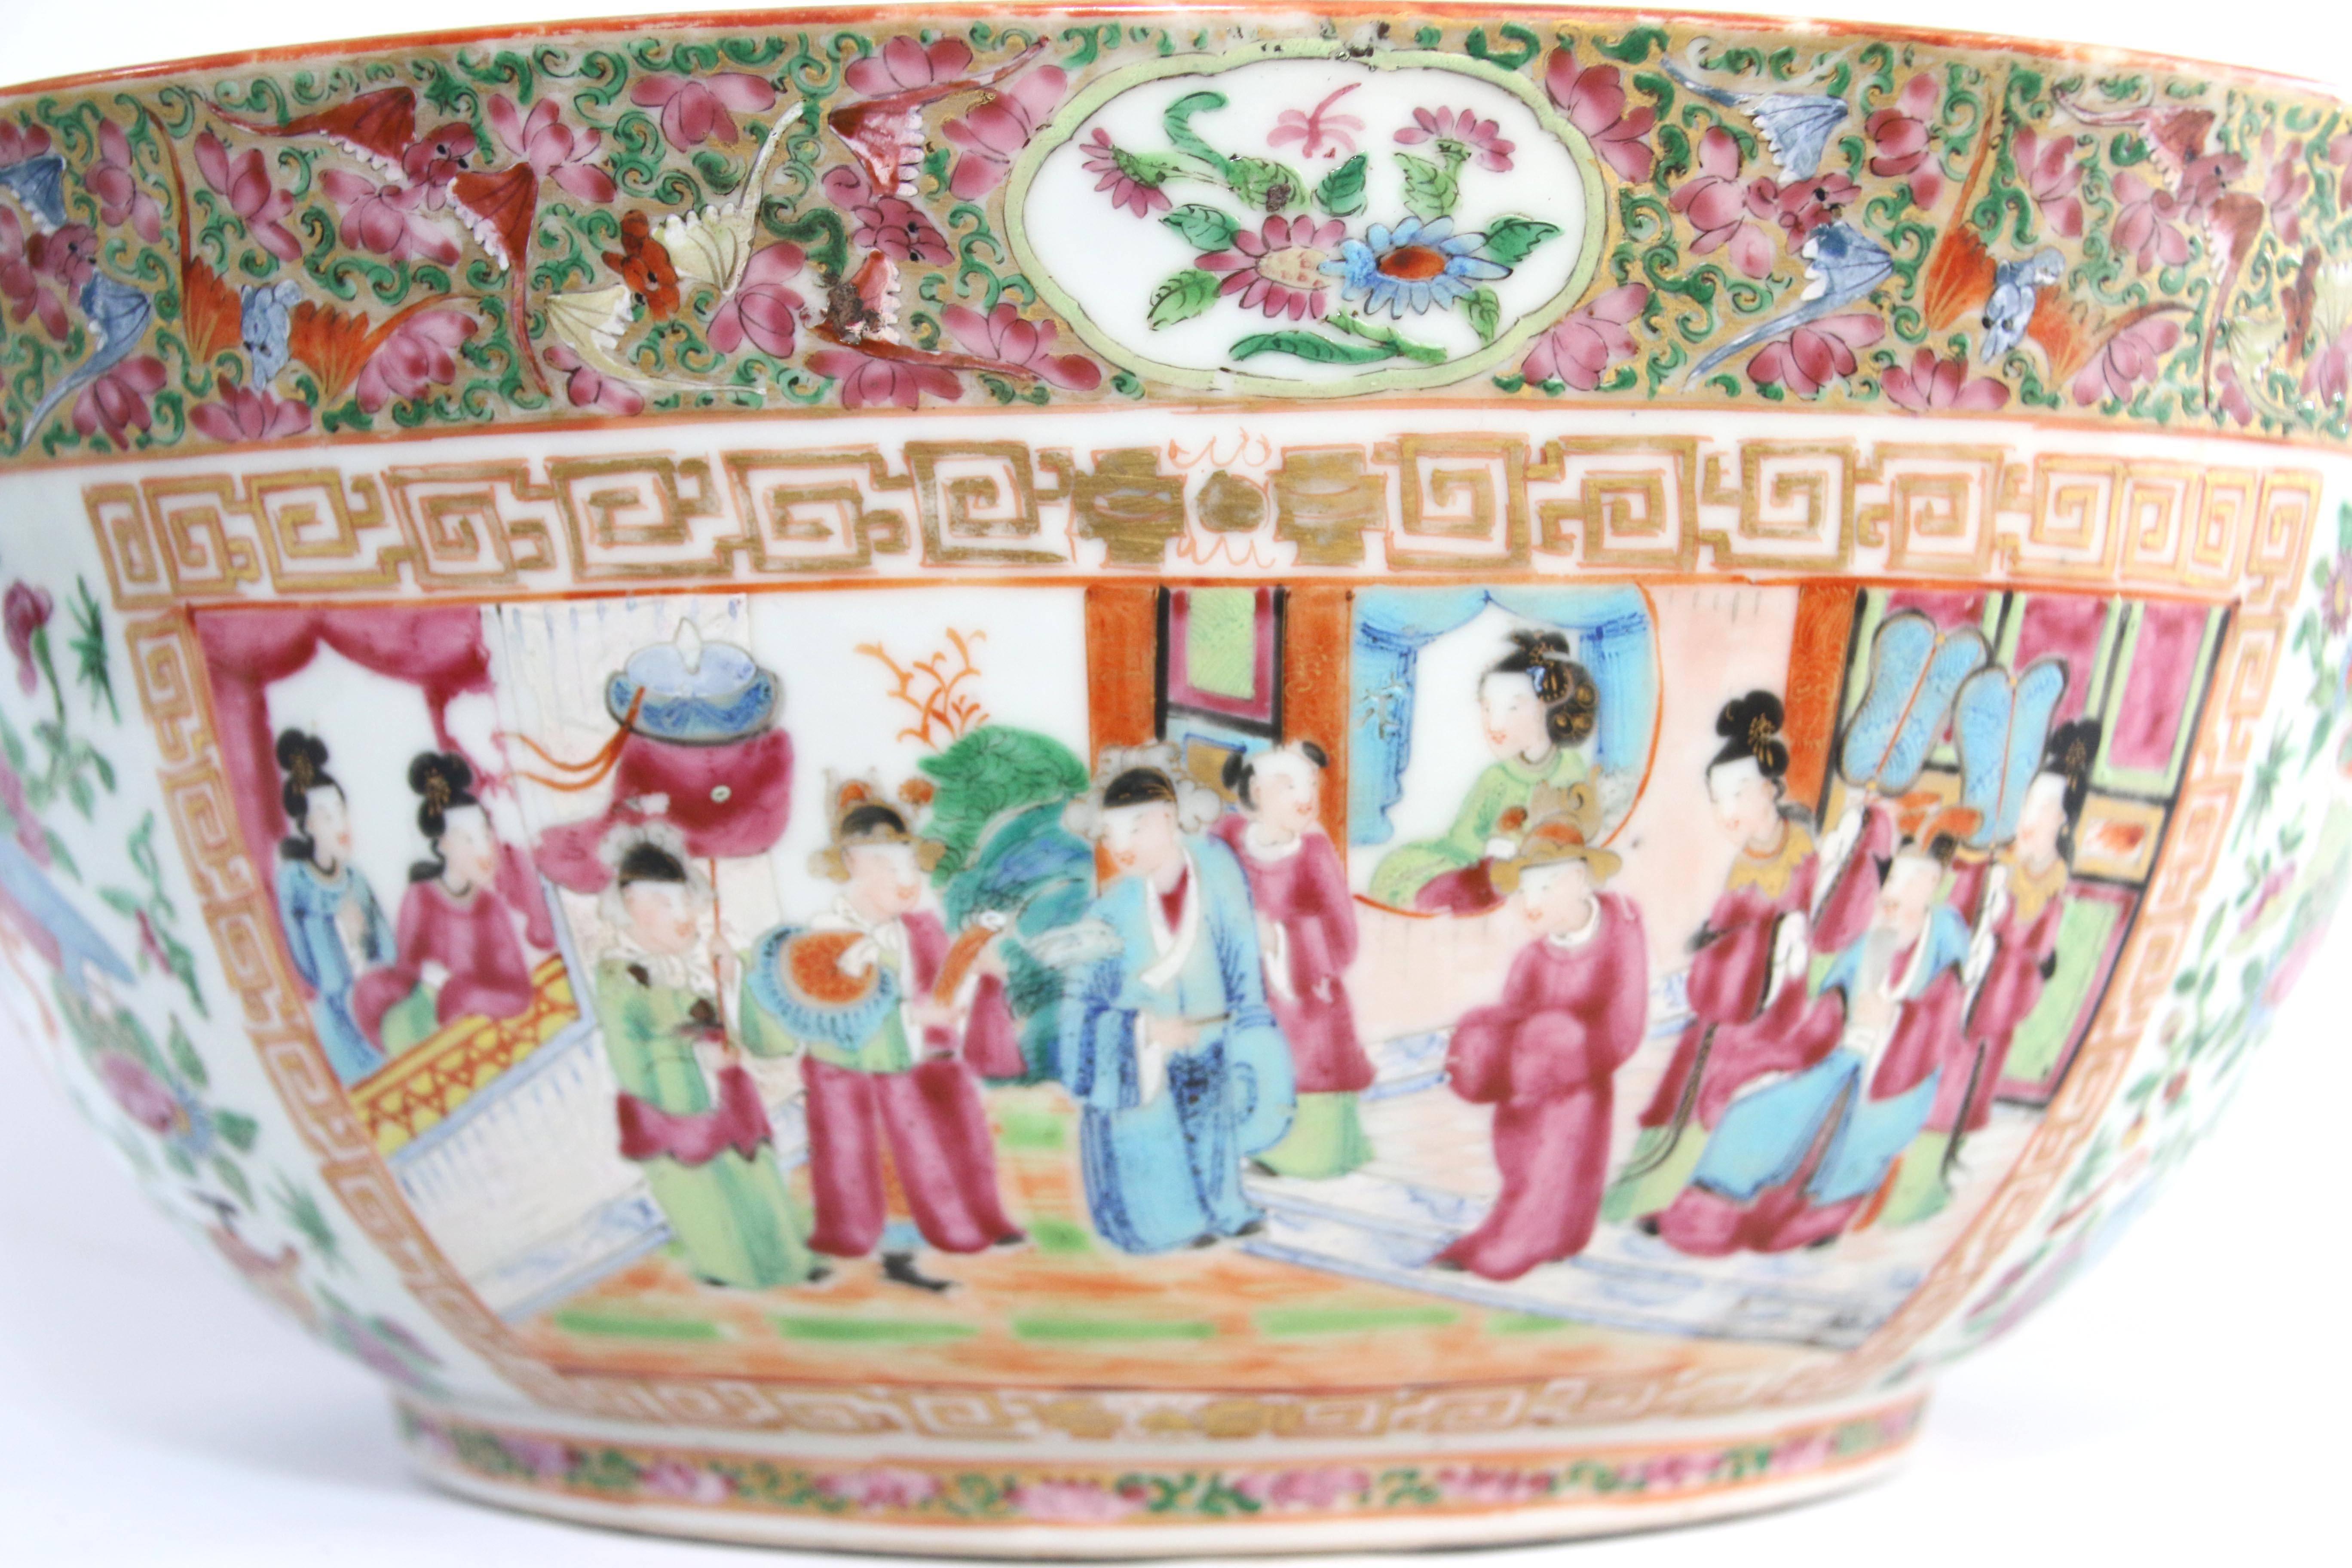 Rose Mandarin porcelain punch bowl, China, 19th century, polychrome enamel-decorated with panels of figures in courtyard settings framed by bands of foliage and ornaments. 

Approximately 6” height x 15 ½” diameter.